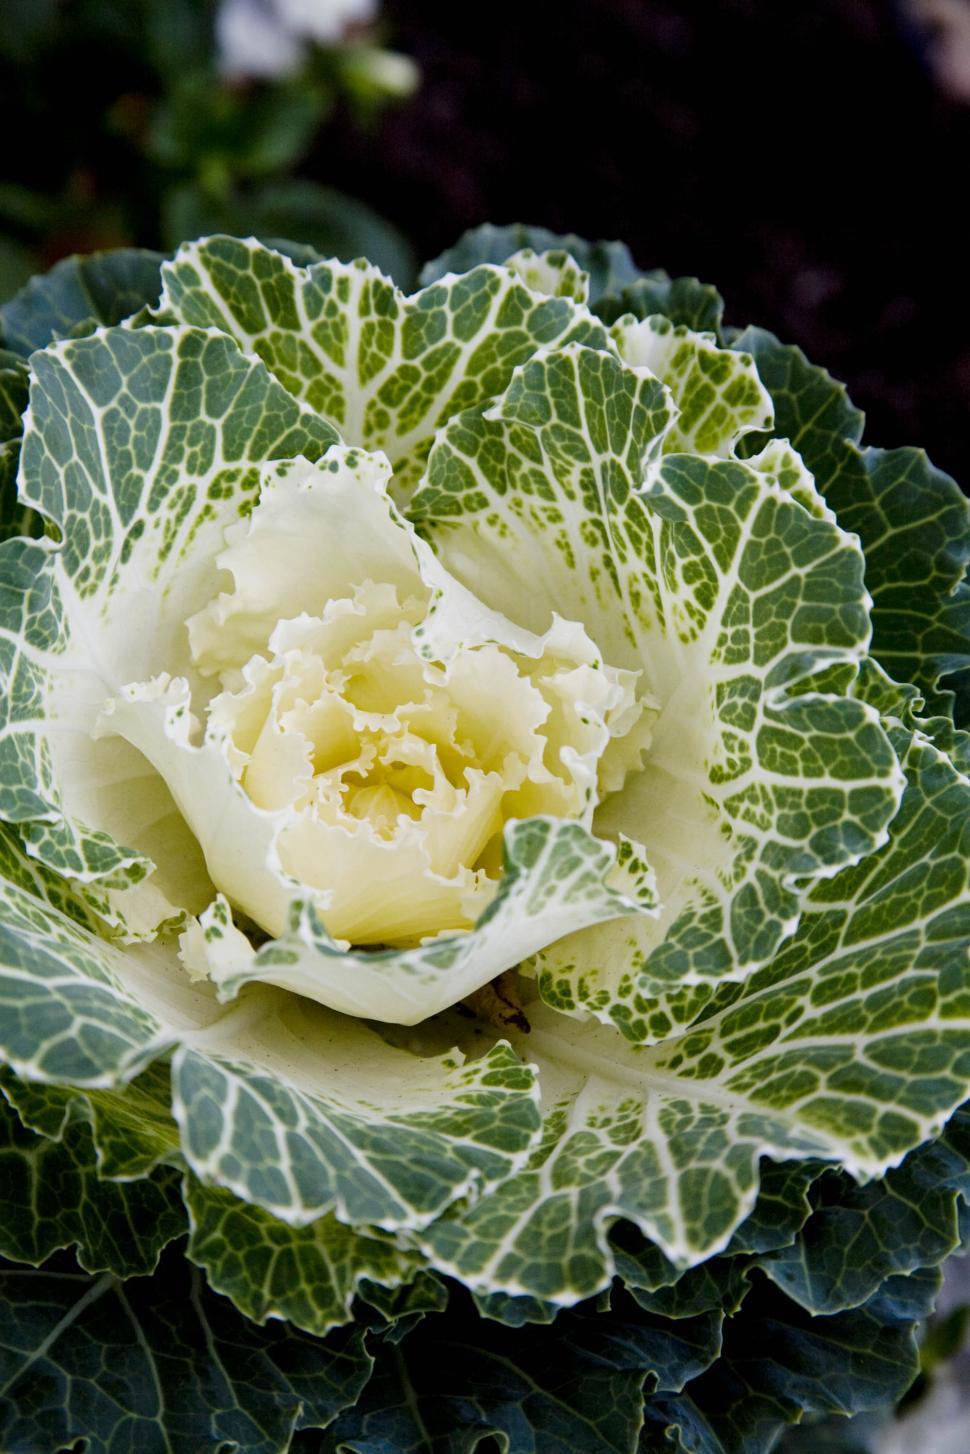 Free Image of Green Vegetable 